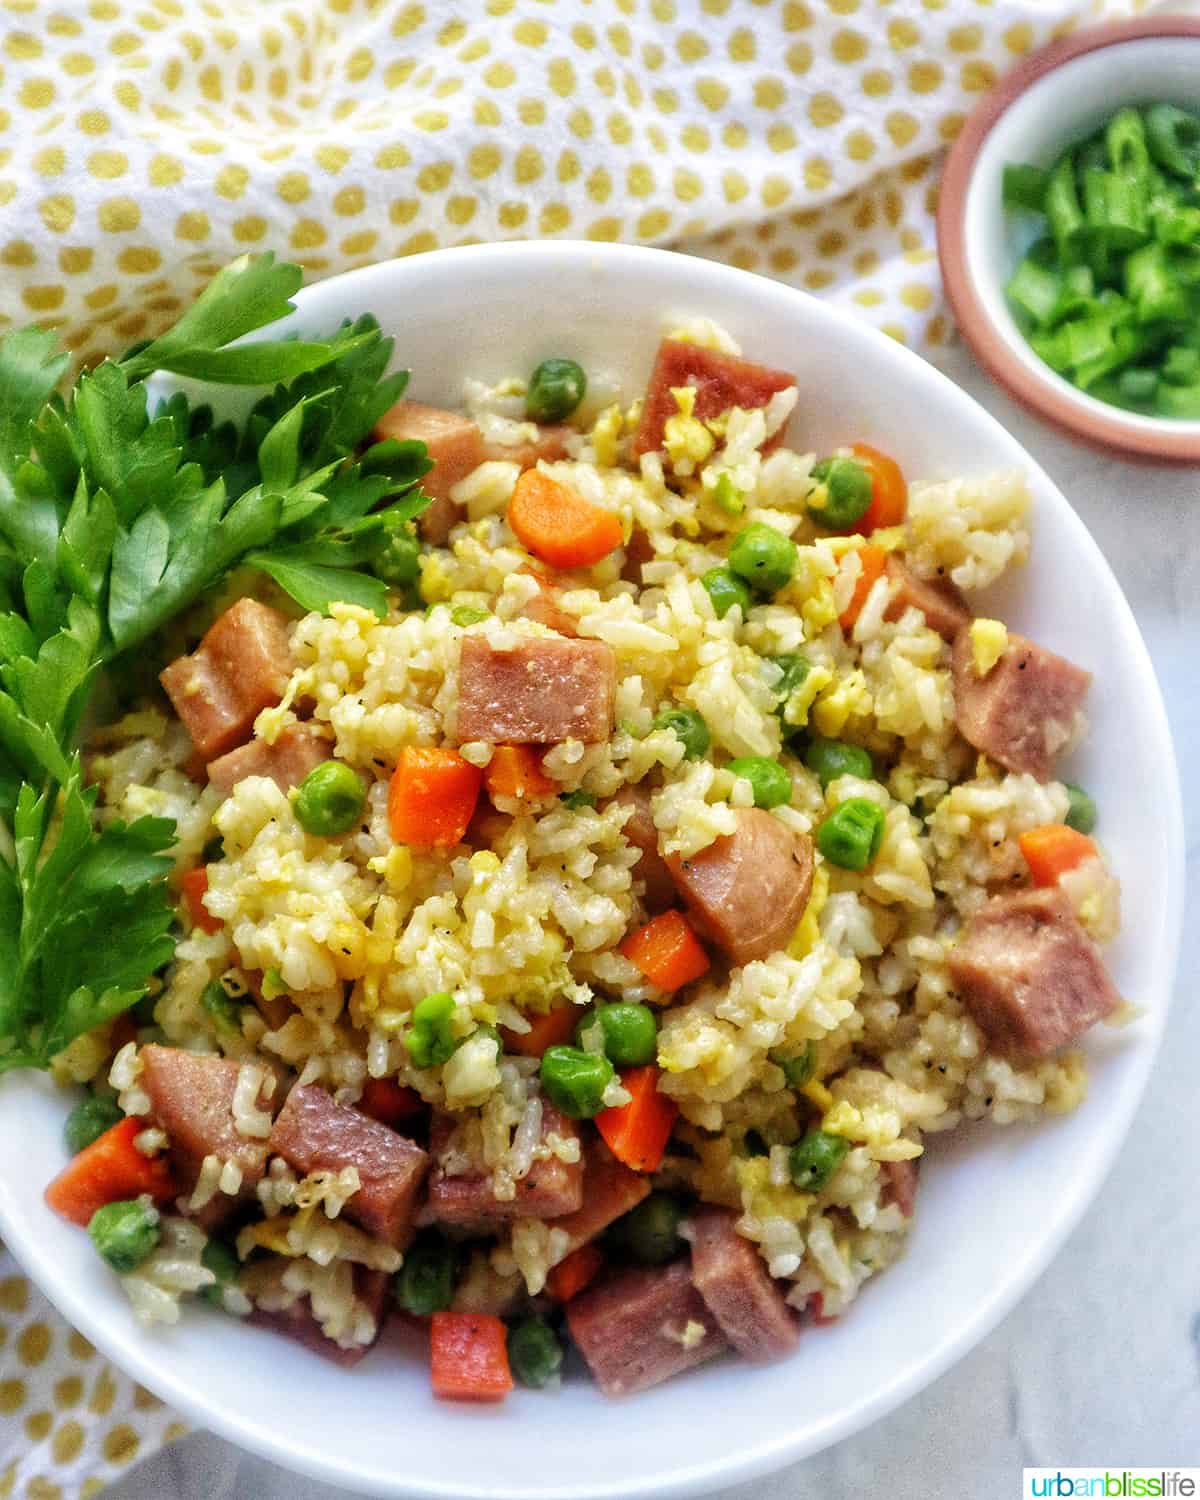 spam fried rice with peas, carrots, and parsley garnish in a white bowl.